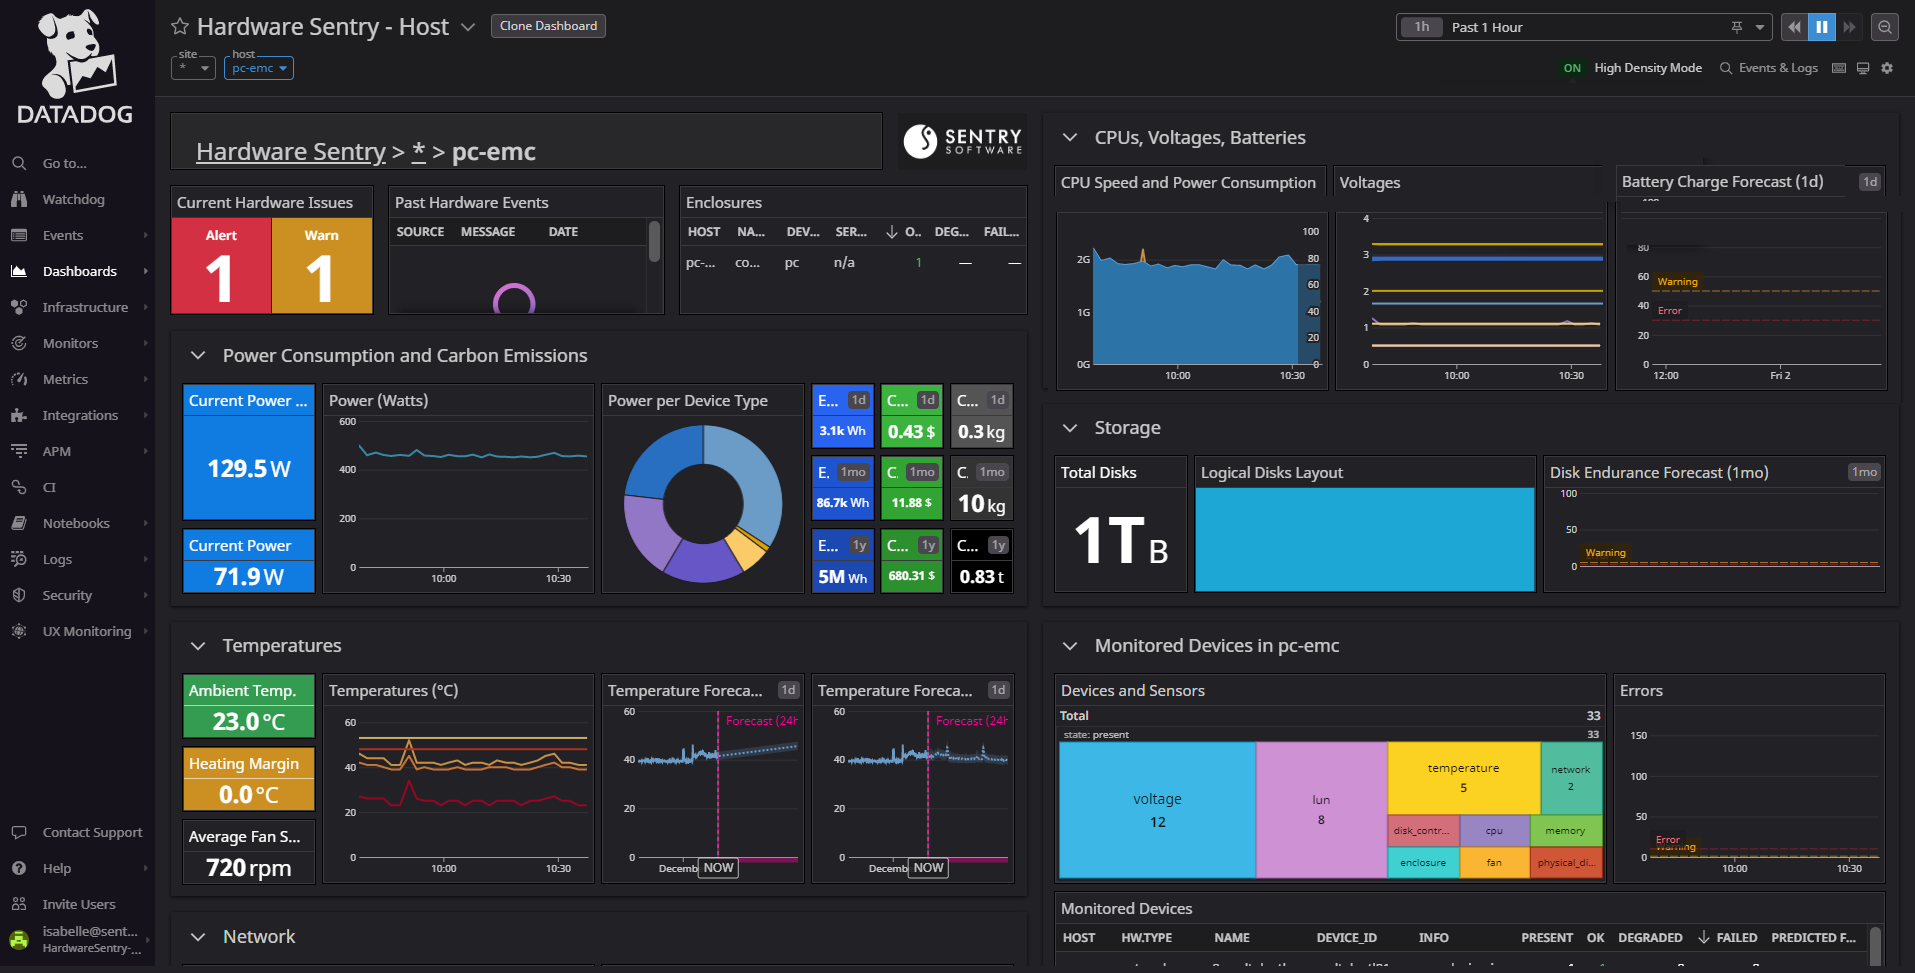 Datadog Dashboard - Observability and sustainability data for the monitored hosts